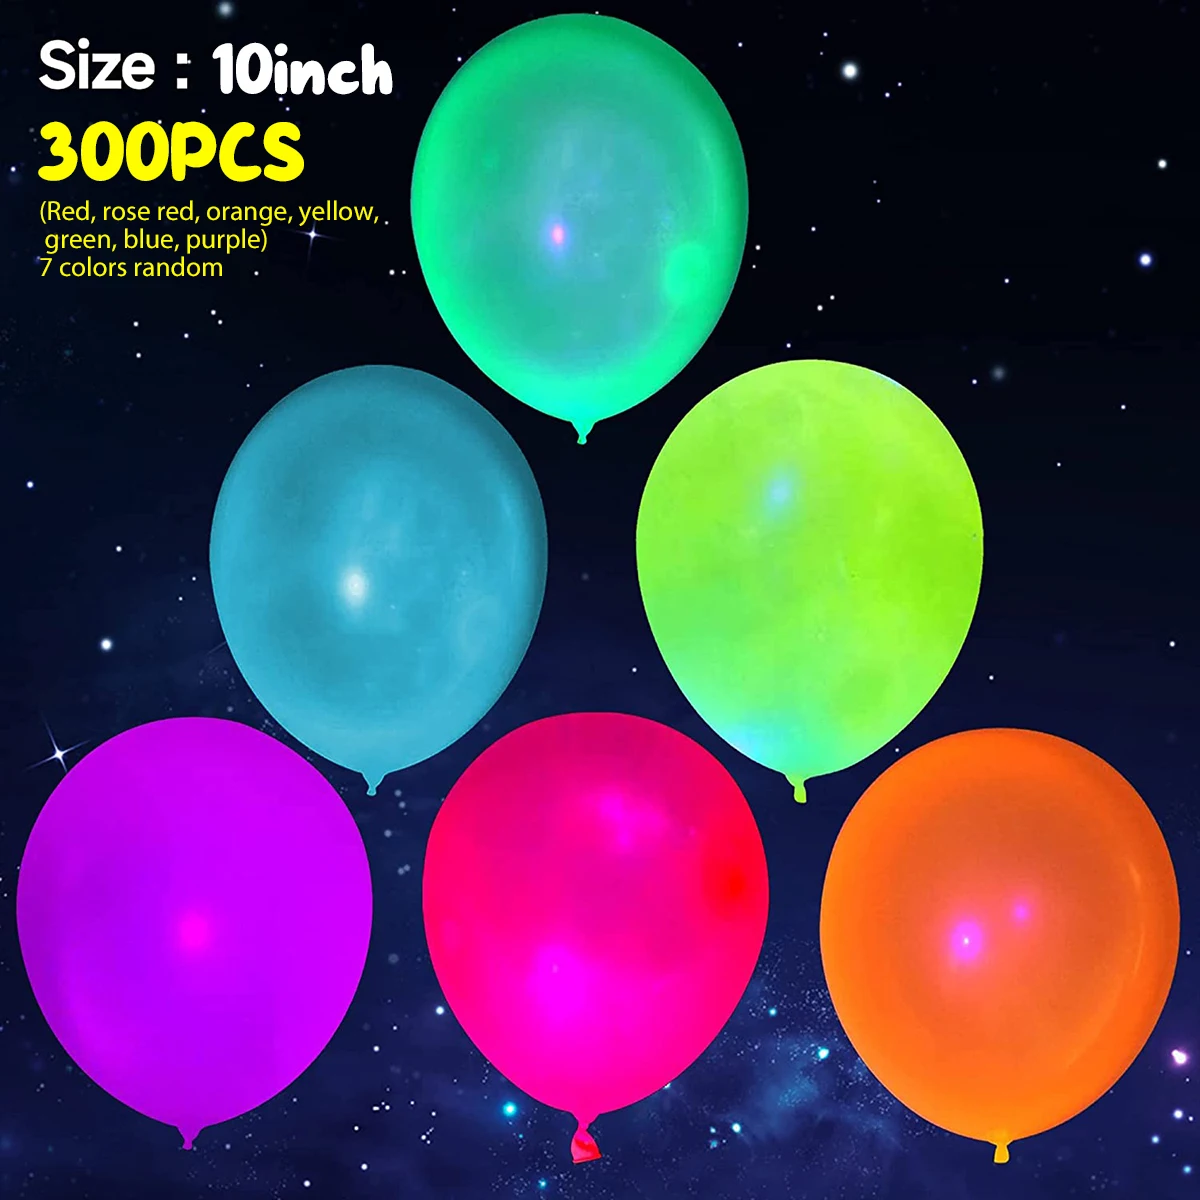 300pcs Neon Glow Balloons Reusable Glow in the Dark Balloons 10 Inch Neon Glow Party Balloons 7 Colors Fluorescent Party images - 6